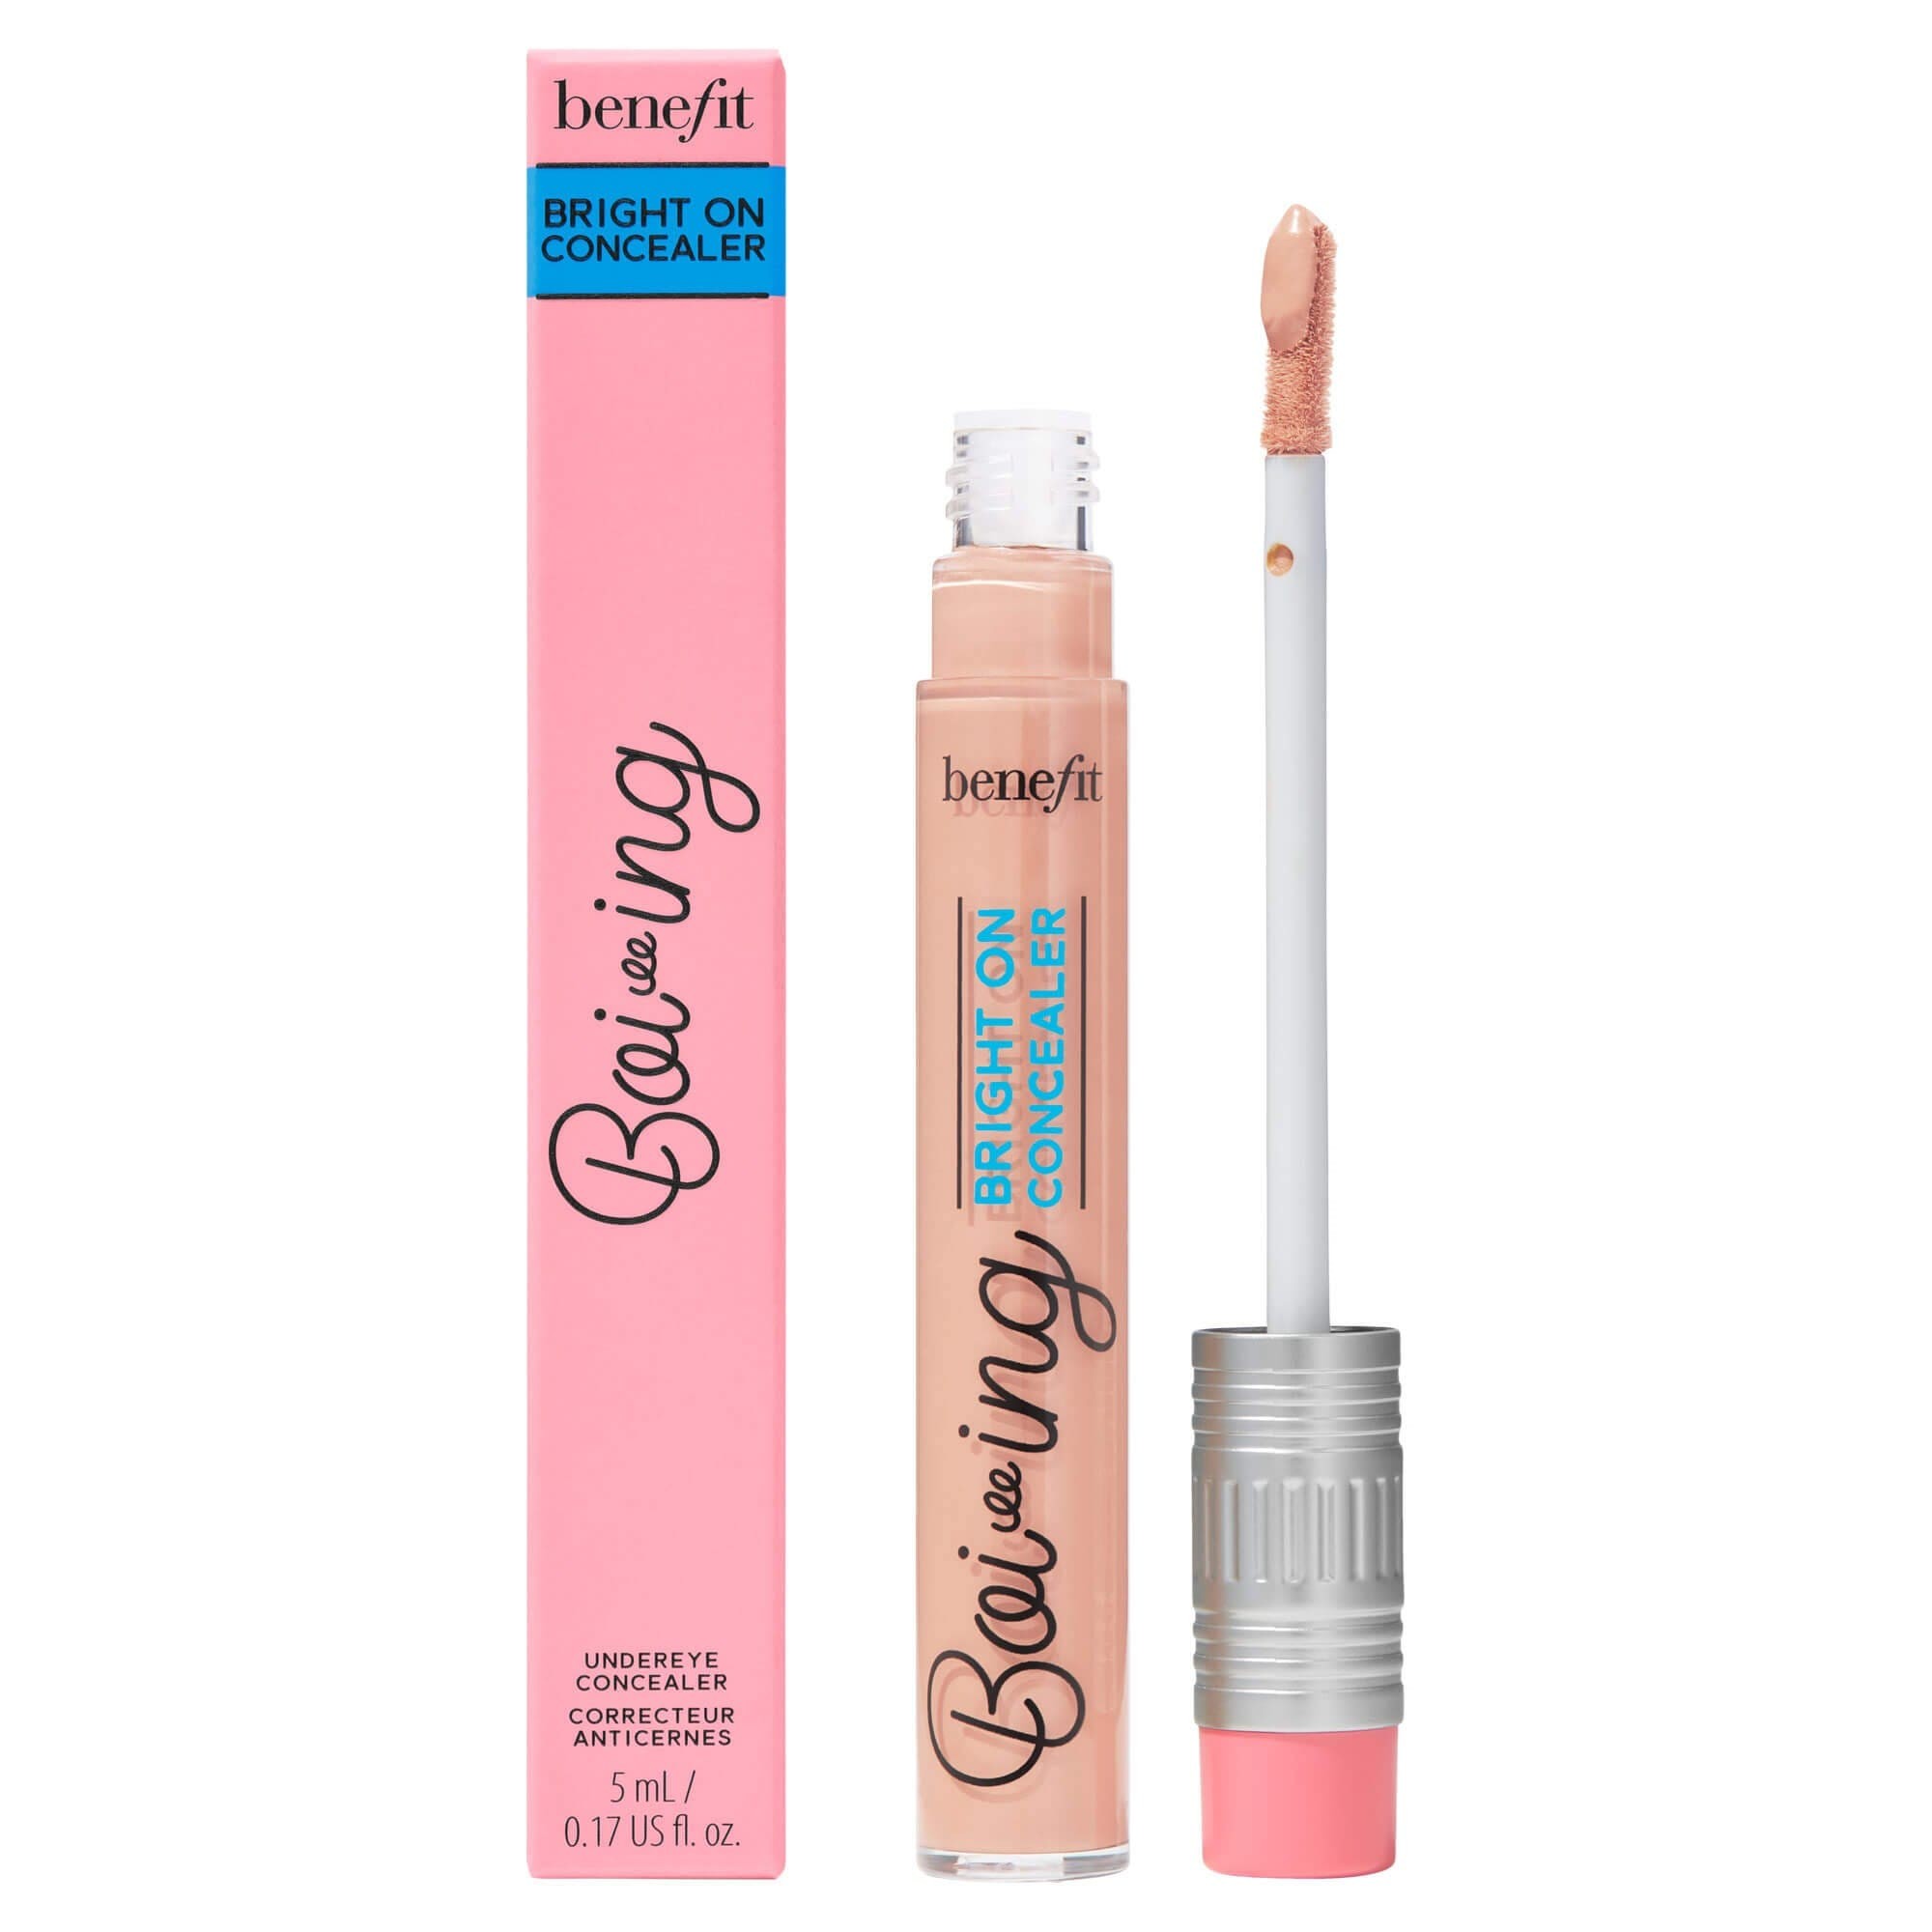 Benefit Cosmetics Boiing Bright On Concealer Lychee